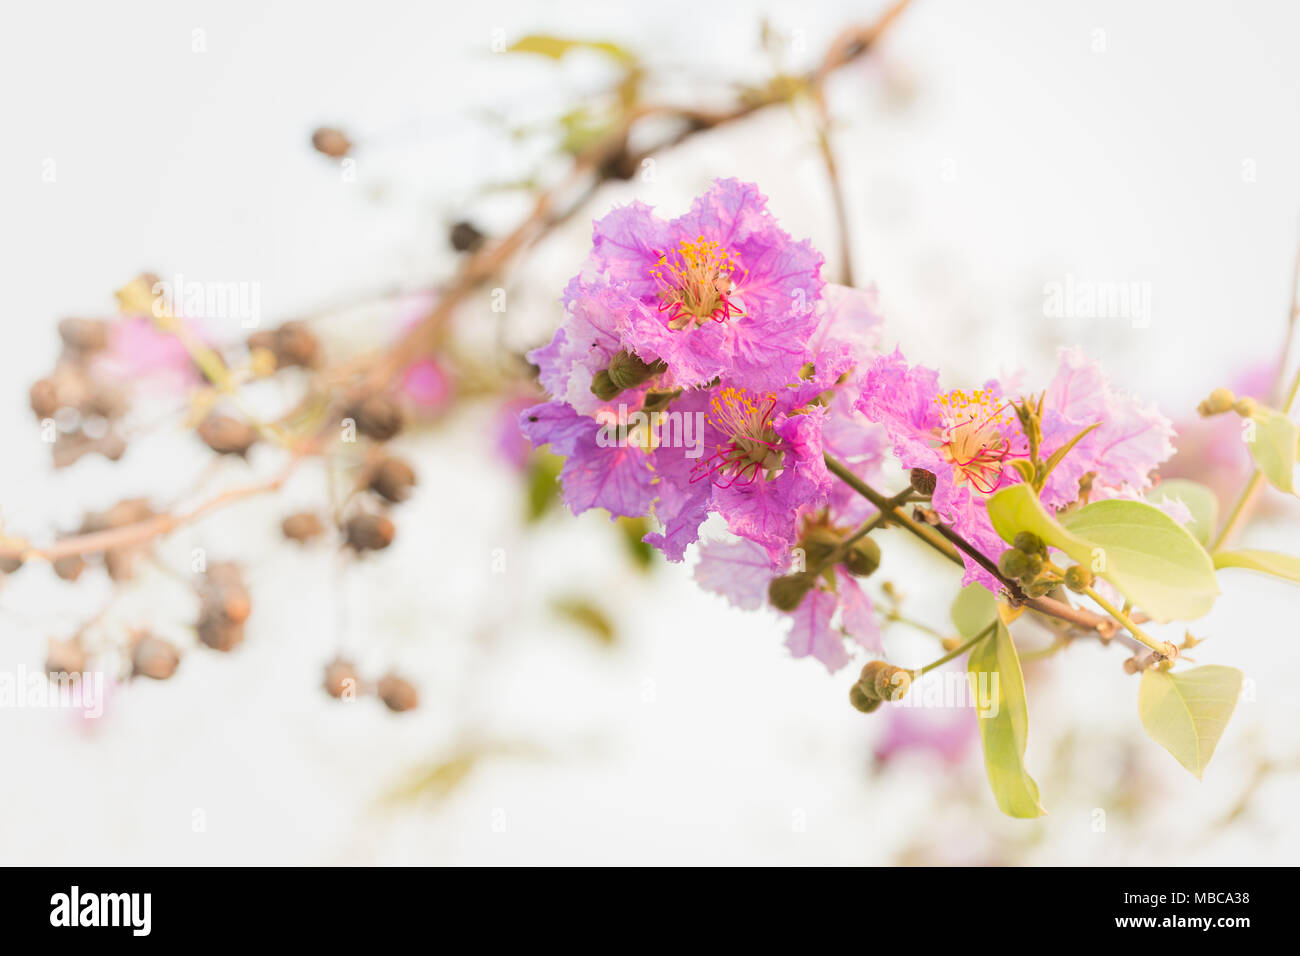 Lagerstroemia macrocarpa Wall Flower,Lythraceae,Queen's flower. Stock Photo